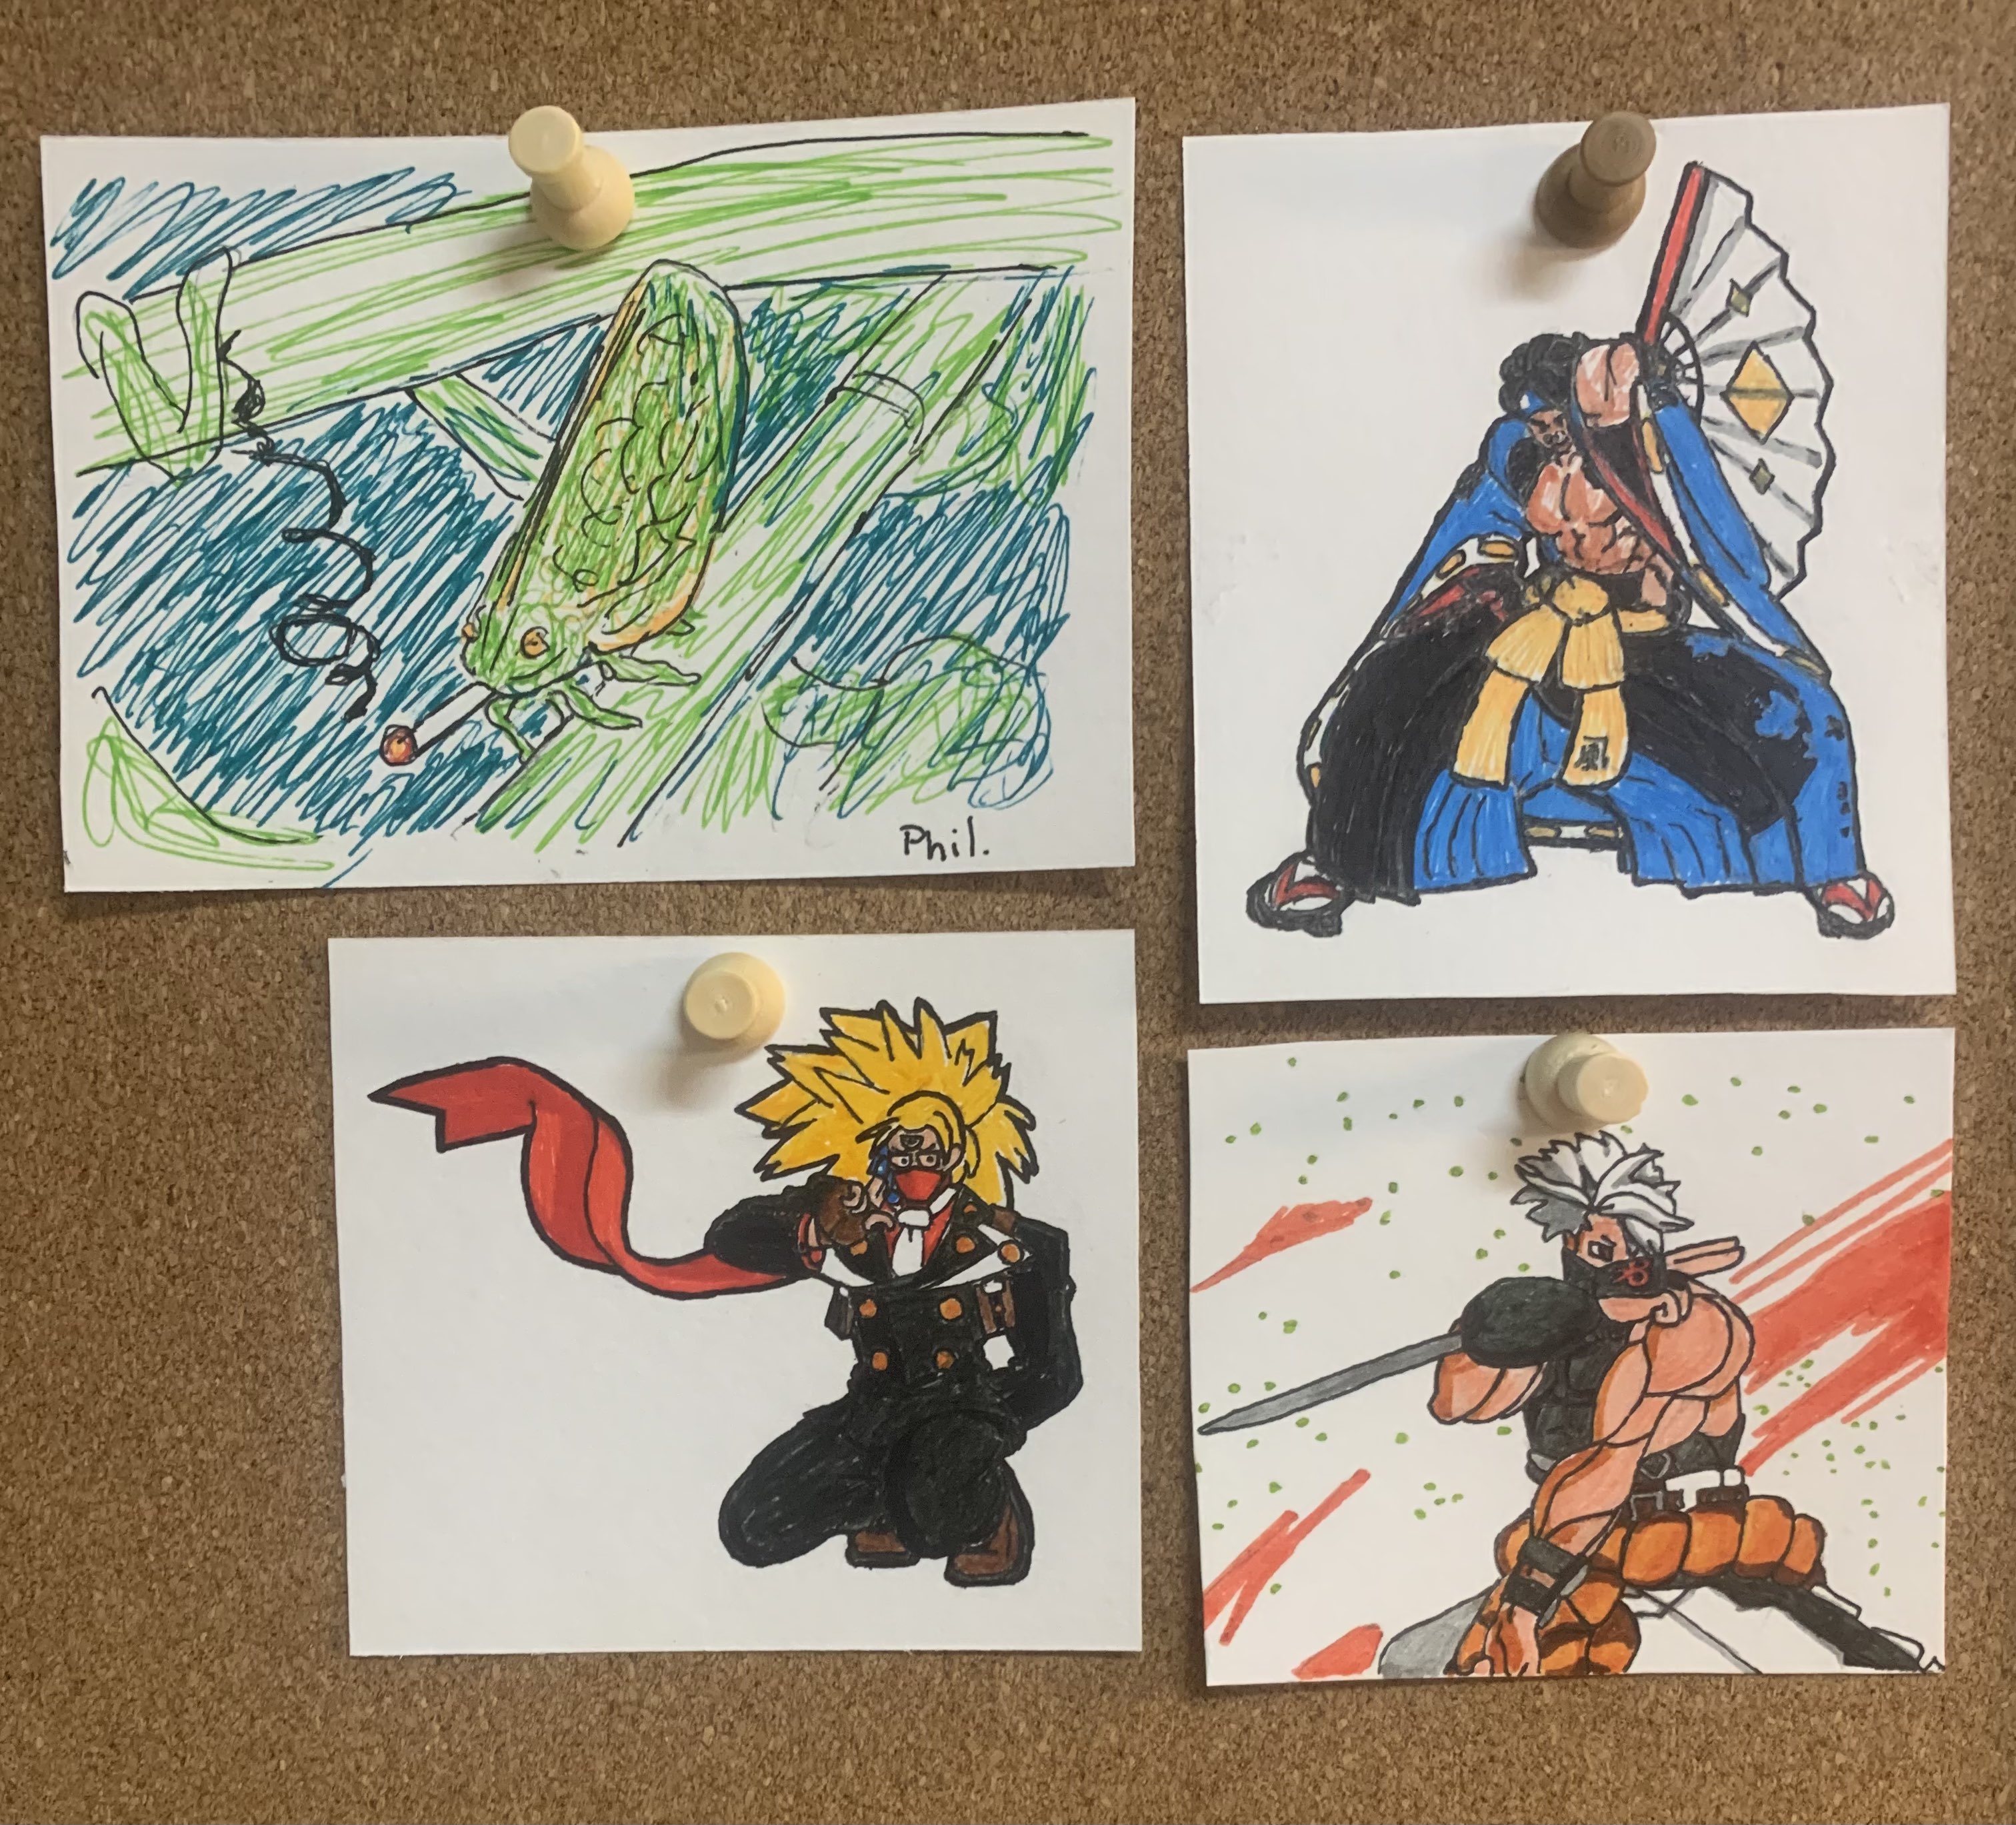 a picture of a bulletin board. there are four, small drawings pinned to it. clockwise from the top left, there is a sketch of a planthopper smoking a blunt, labeled 'Phil;' a drawing of the sprite of Anji Mito from Guilty Gear Strive doing his counter overdrive, where he stands with a wide stance and holds one of his fans like a shield; a drawing of Chipp Zanuff from Guilty Gear Strive starting his Zansei Rouga overdrive, where he stands in a ninja pose with red and green particles around him; and a drawing of Answer from Guilty Gear Xrd REV 2 squatting while he talks on the phone